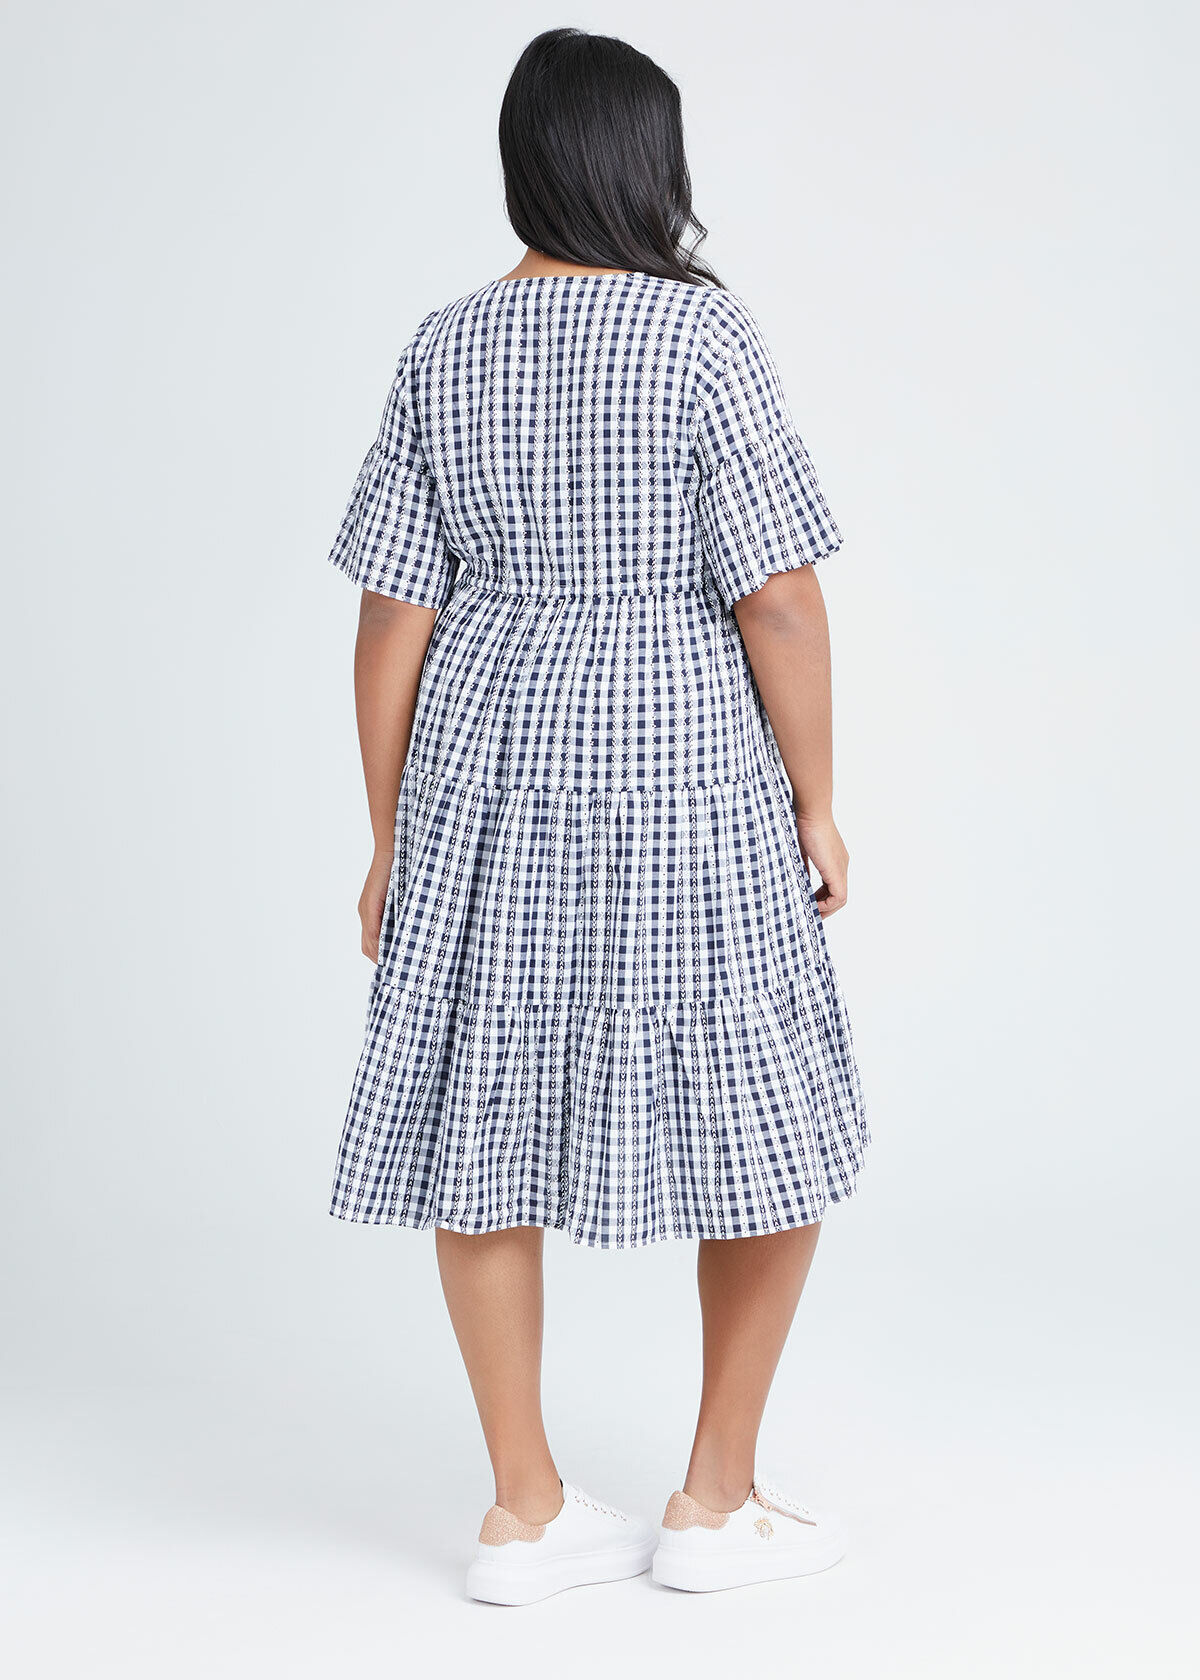 Shop Cotton Gingham Tiered Dress in ...